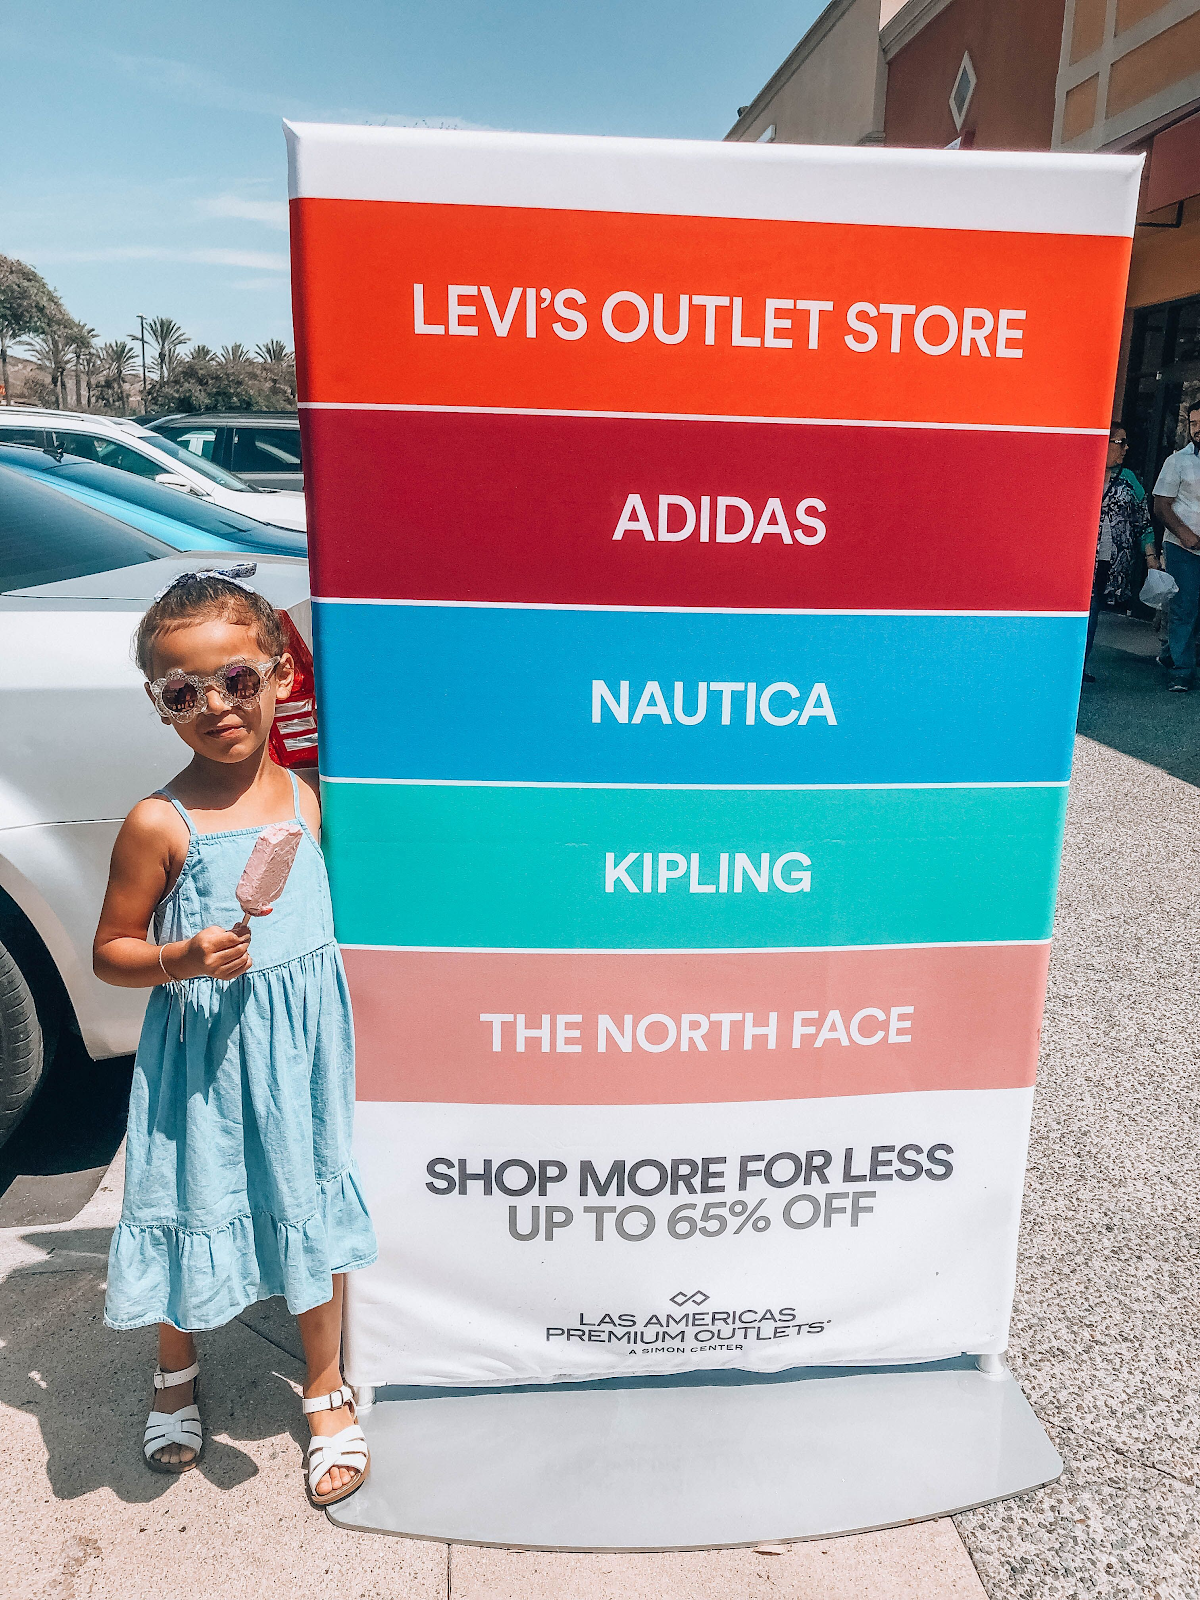 Back to School Shopping at Las Americas Premium Outlets - Aly & Co.